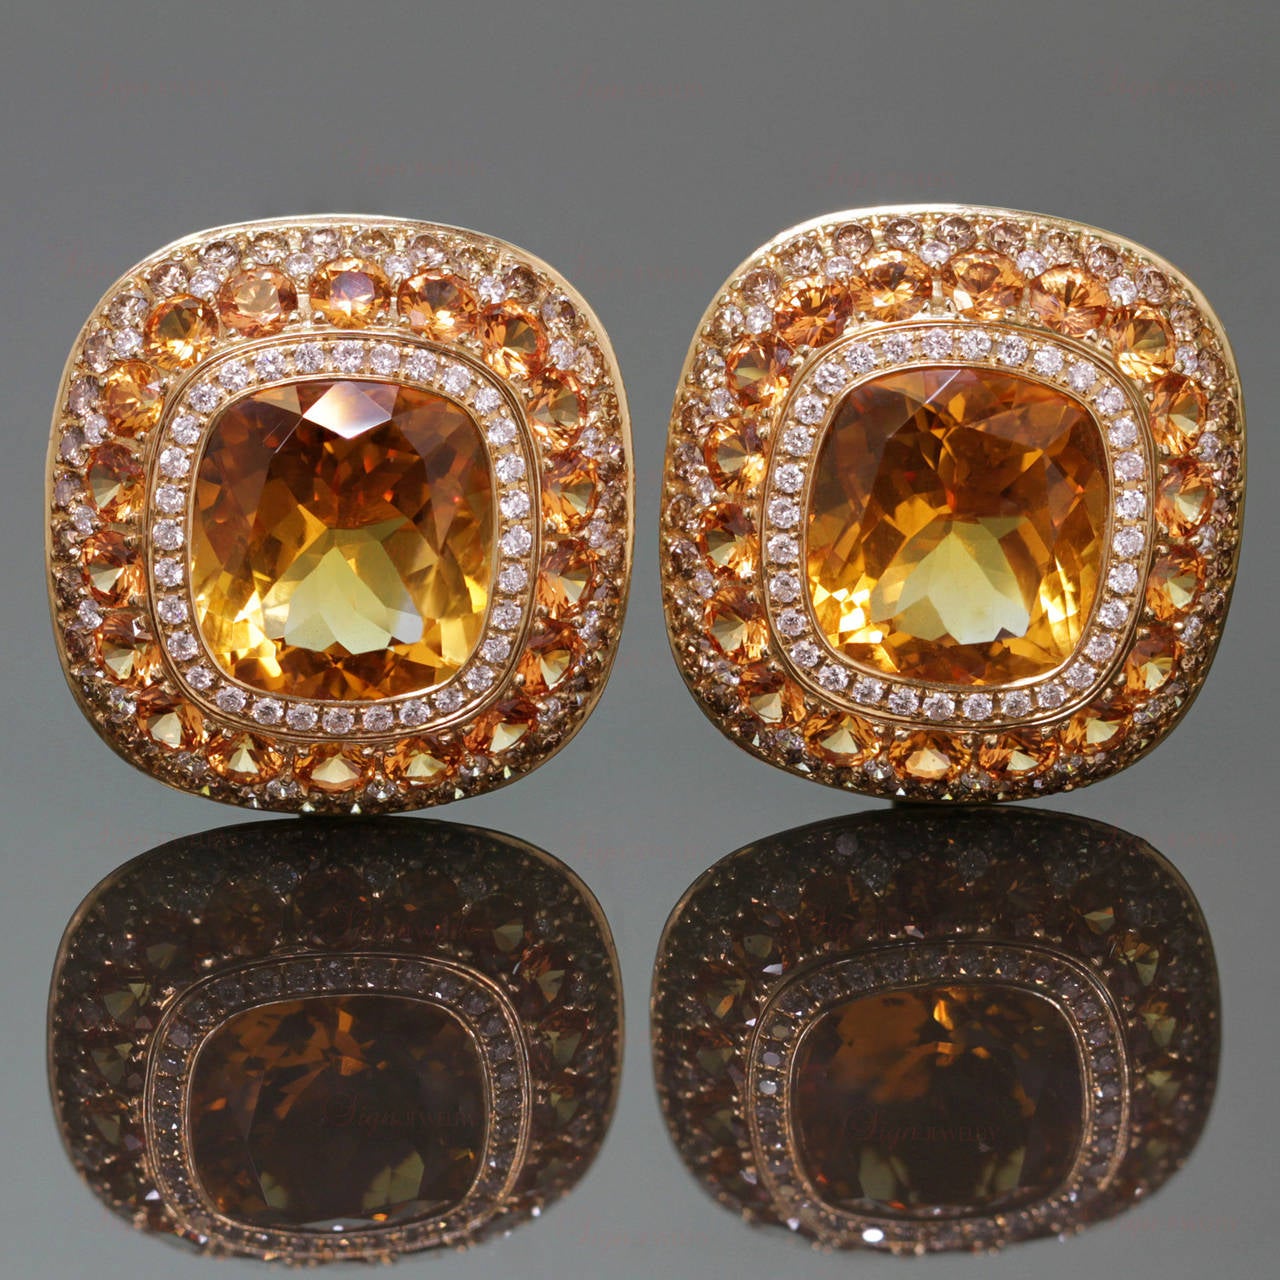 These captivating earrings are hand-made in 18k yellow gold and are set with 12.0mm x 14.0mm natural yellow citrines, accented with 100 sparkling white diamonds of an estimated 1.28 carat, 72 VS champagne diamonds of an estimated 2.16 carats, and